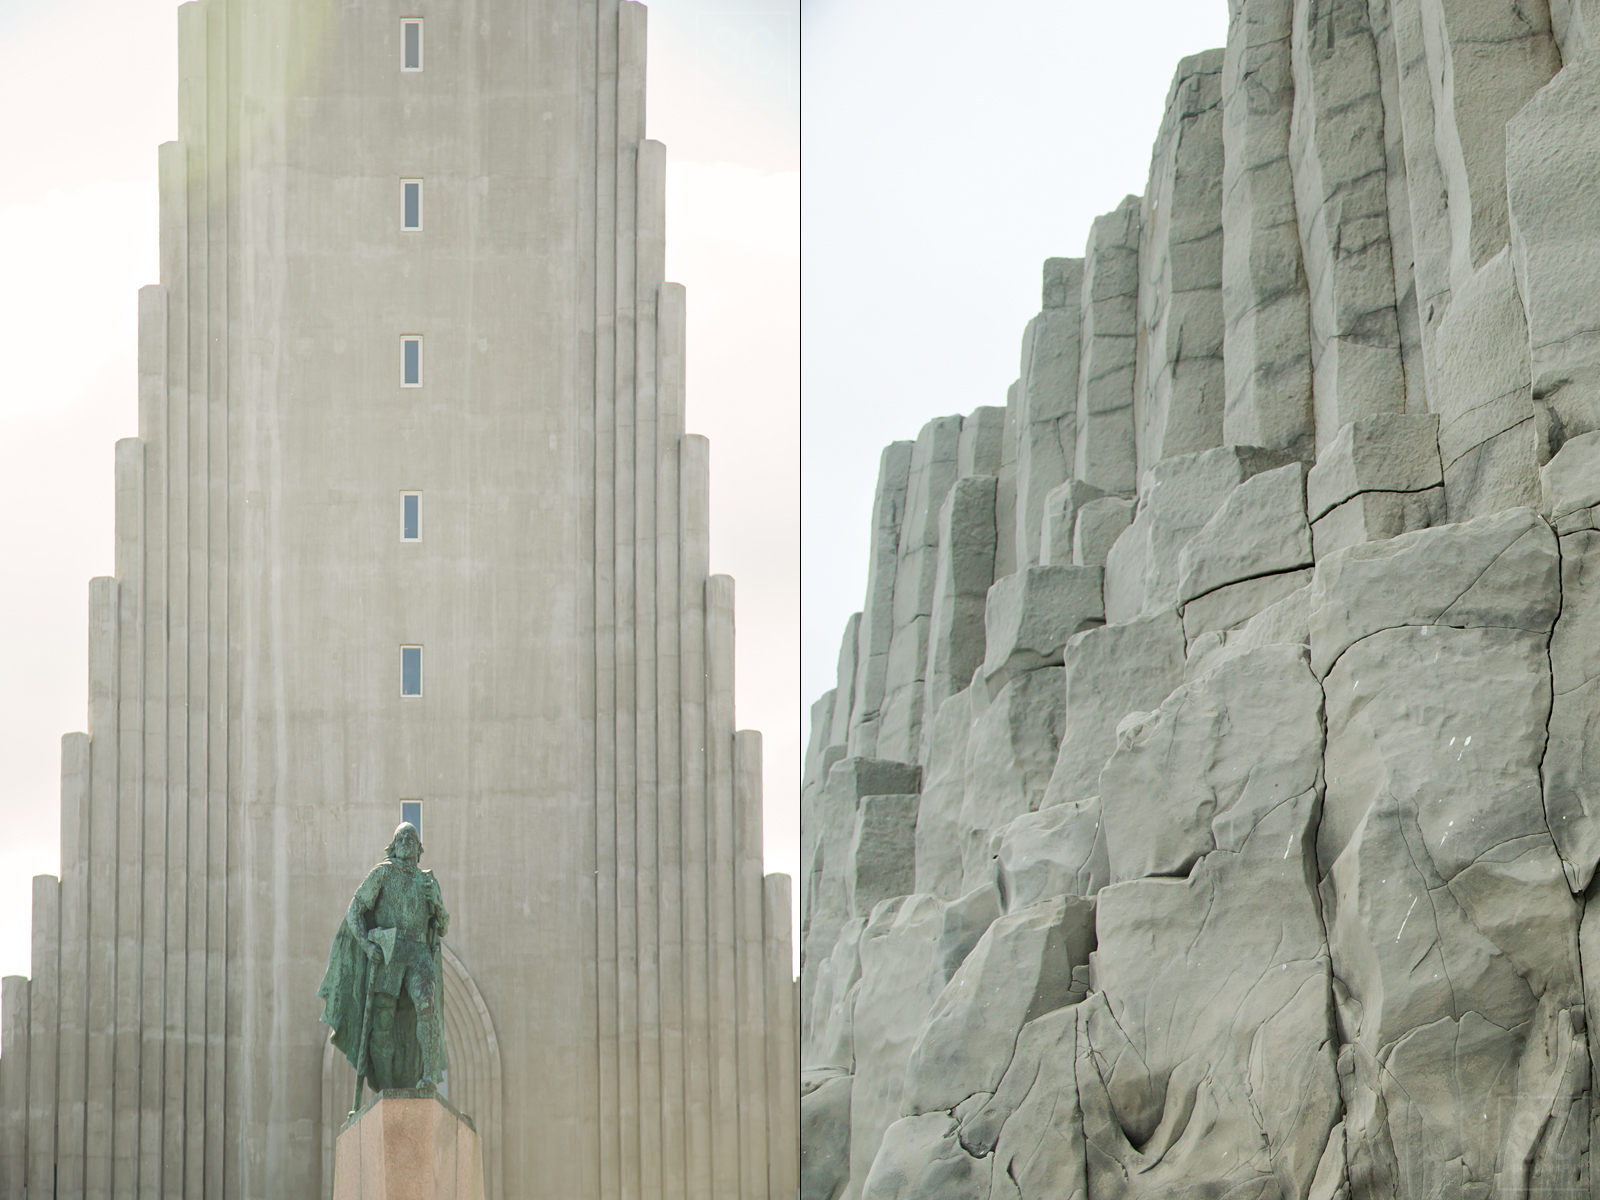 The stacks from the beach in Vik may have been the inspiration for Hallgrimskirkja church